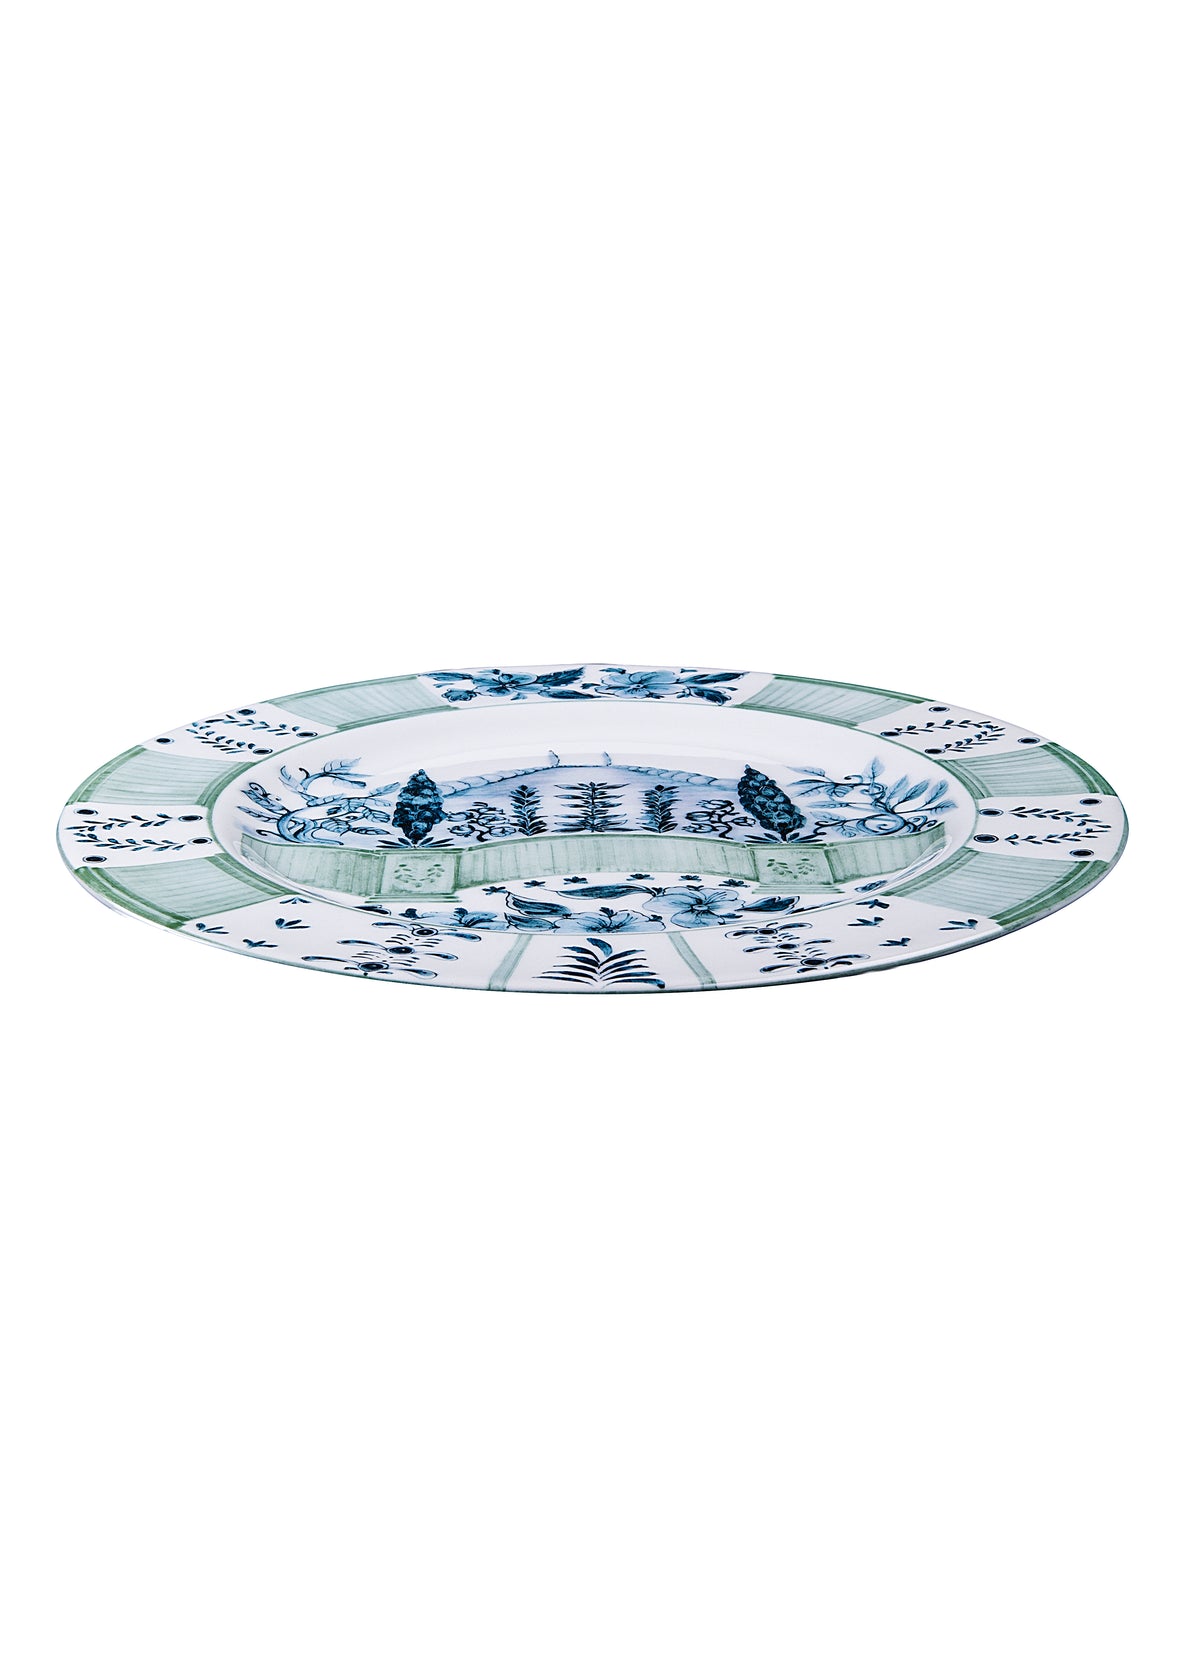 Blue Italian Views Plates Collection, Set of 6